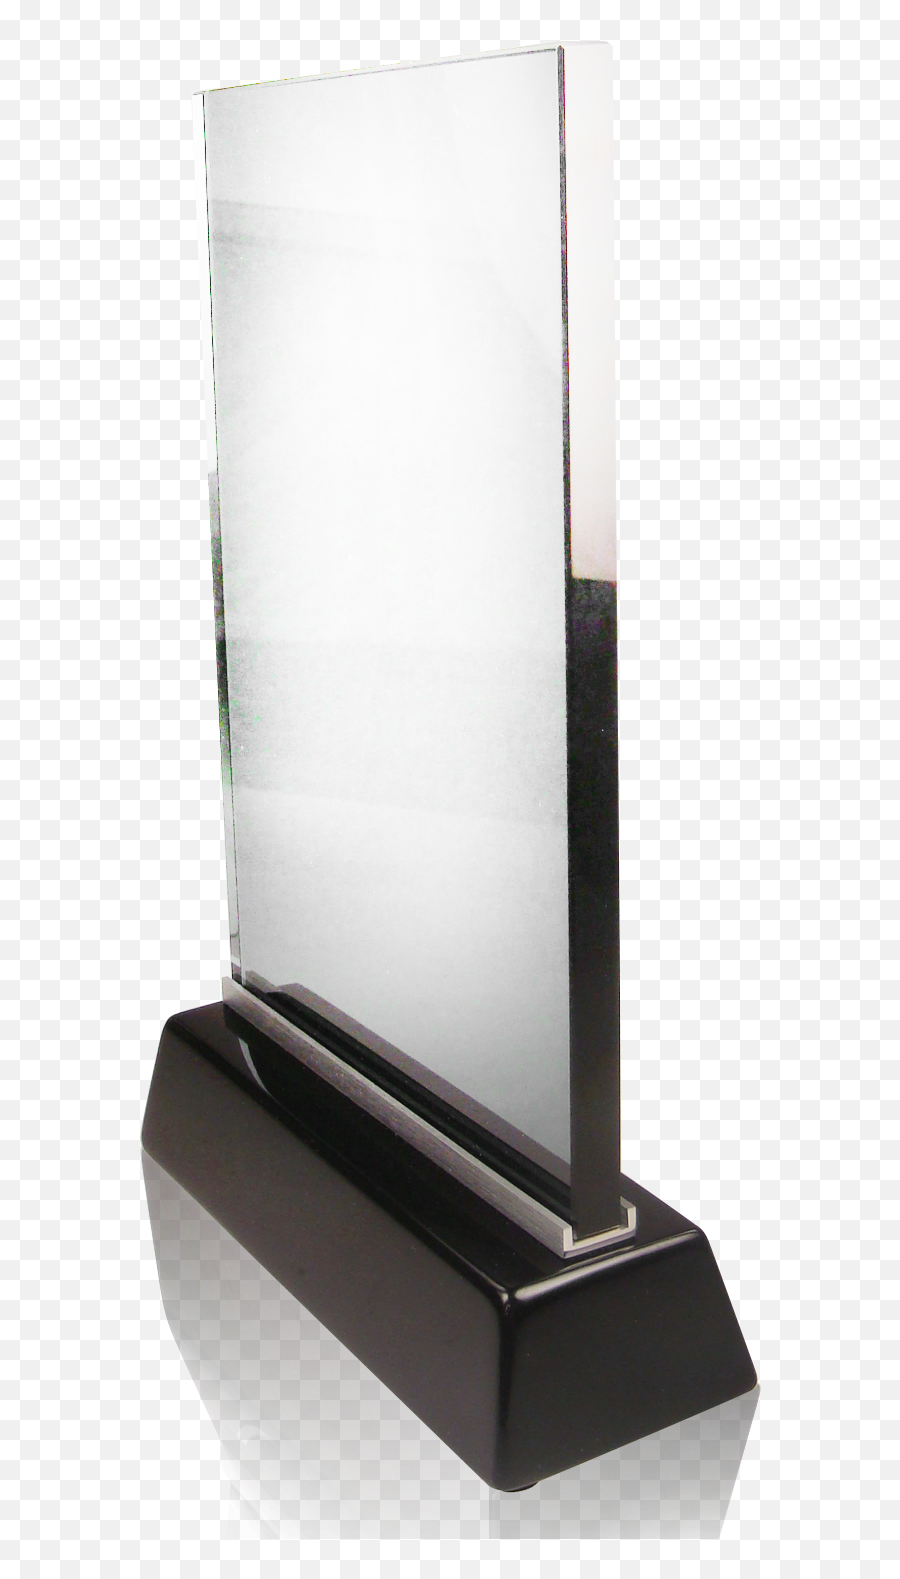 Glass Panel Png Transparent Image - Glass Information Panel,Glass Panel Png